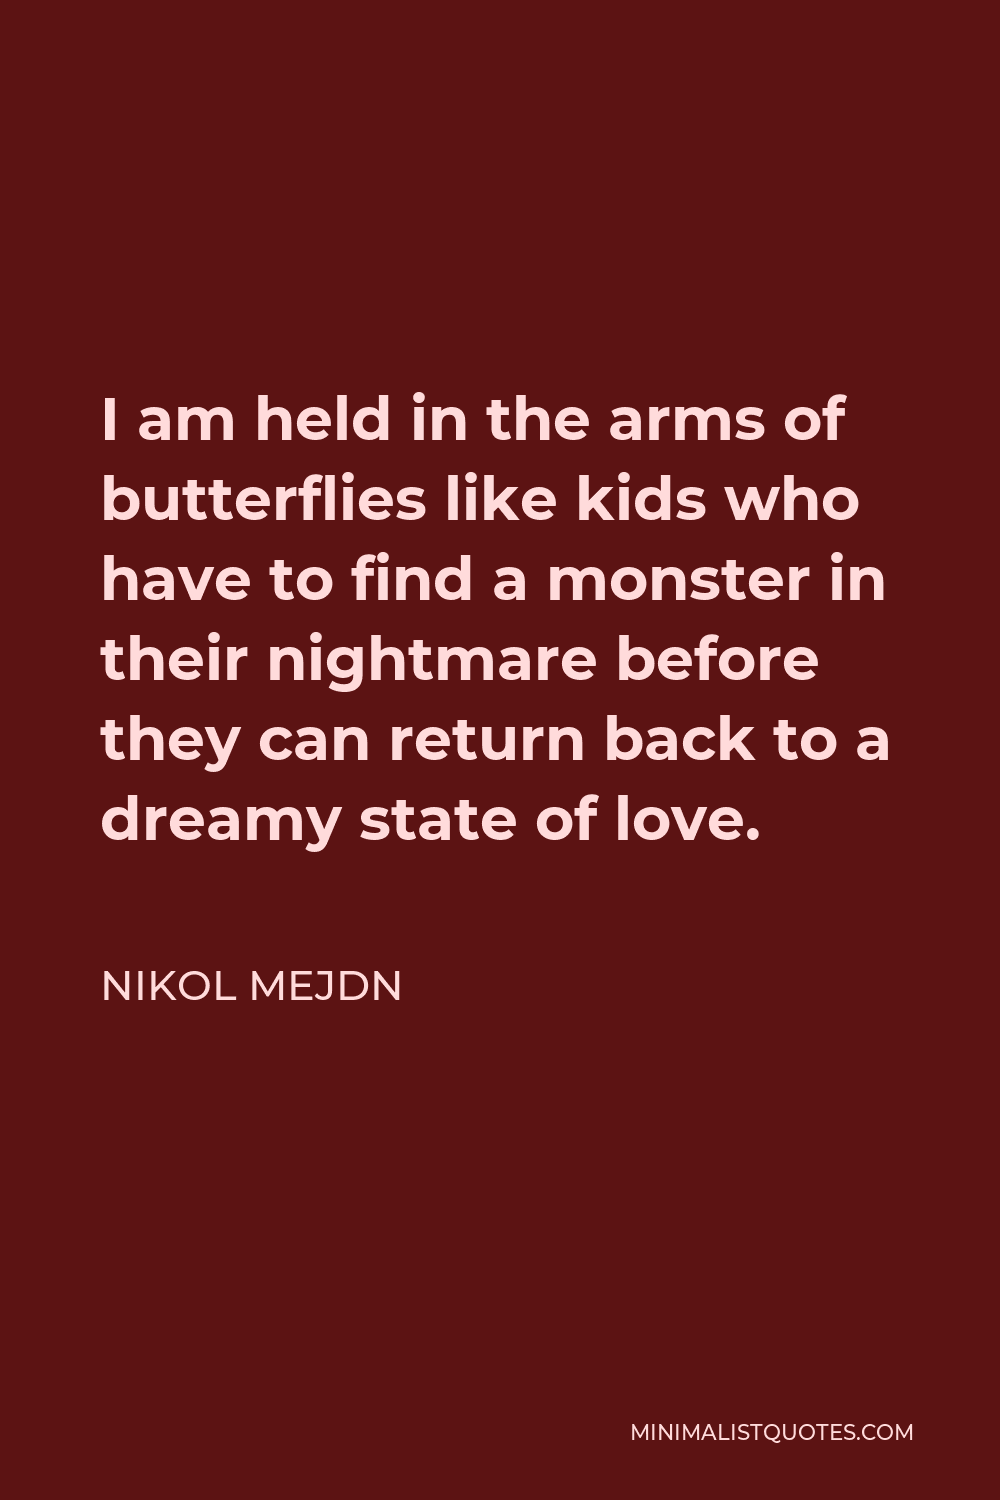 Nikol Mejdn Quote - I am held in the arms of butterflies like kids who have to find a monster in their nightmare before they can return back to a dreamy state of love.